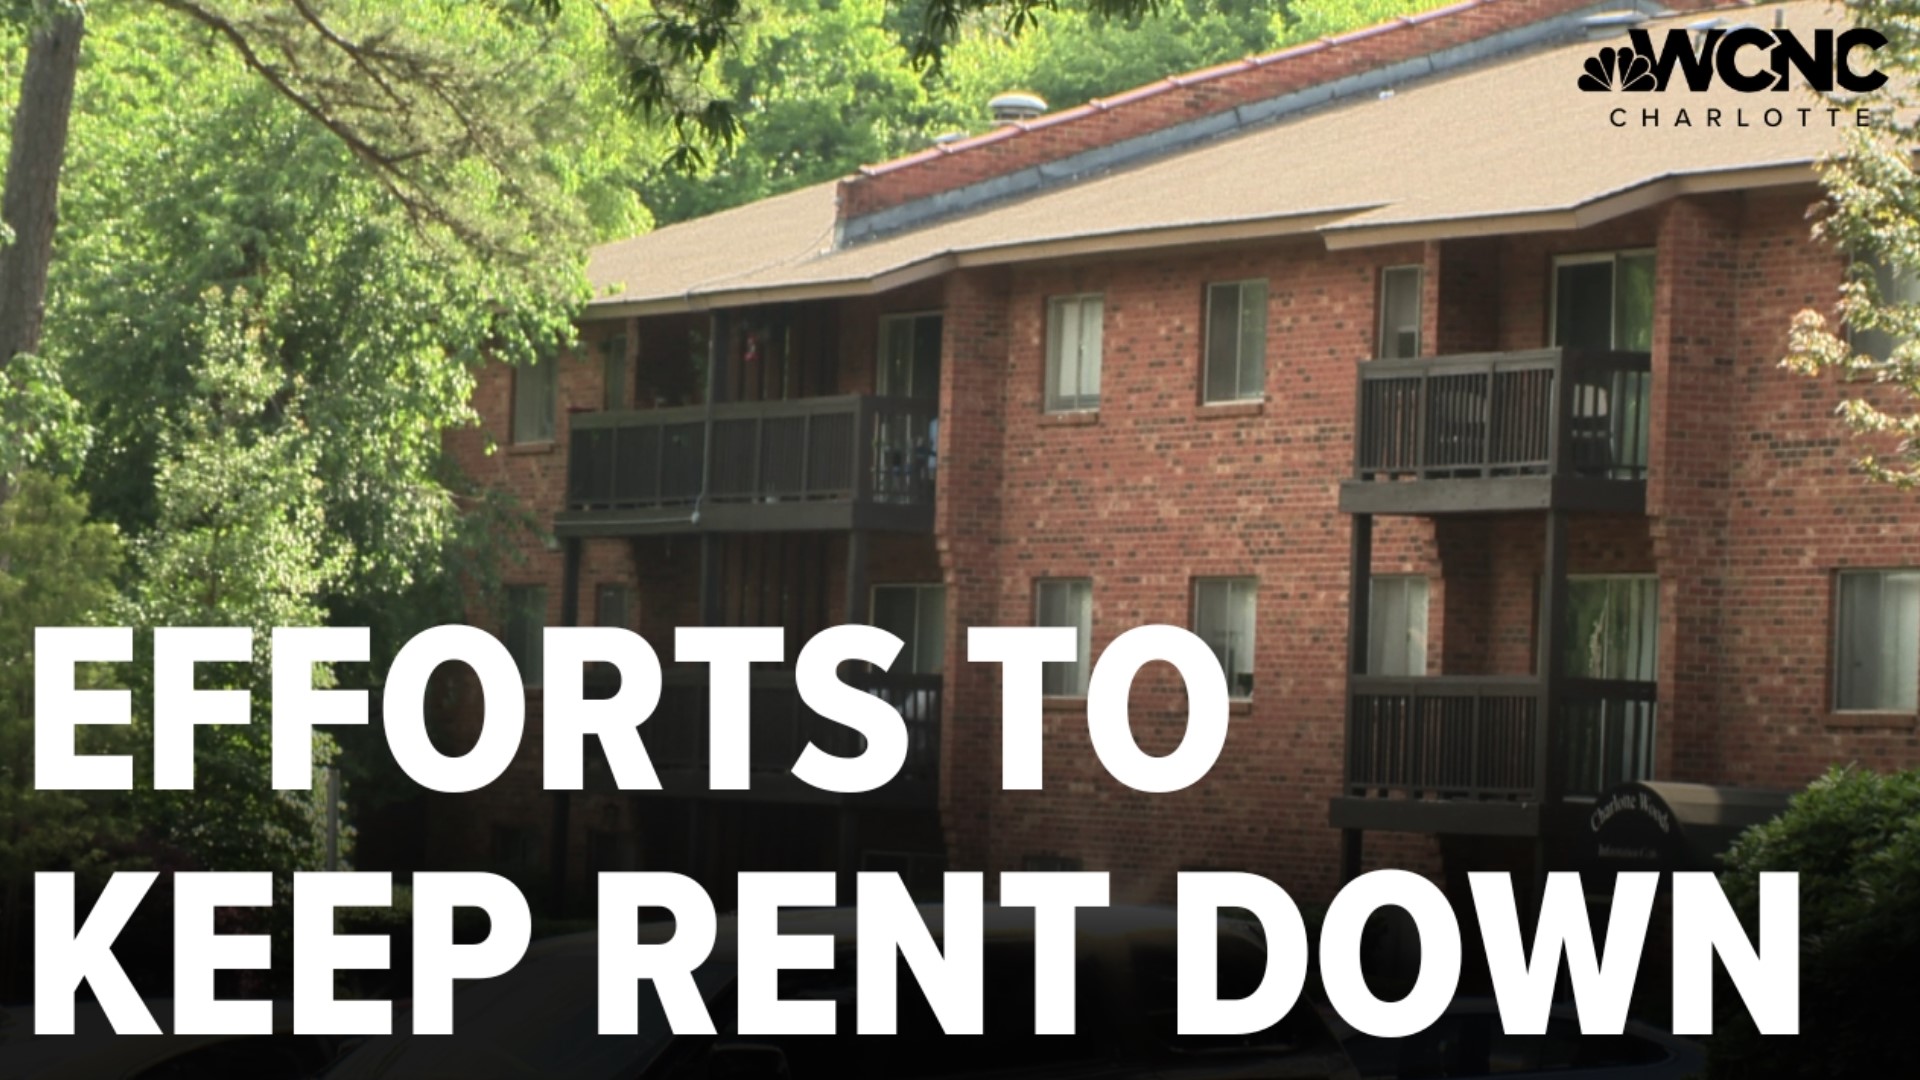 Charlotte Woods offers lower rent prices than nearby apartments but needs renovations.